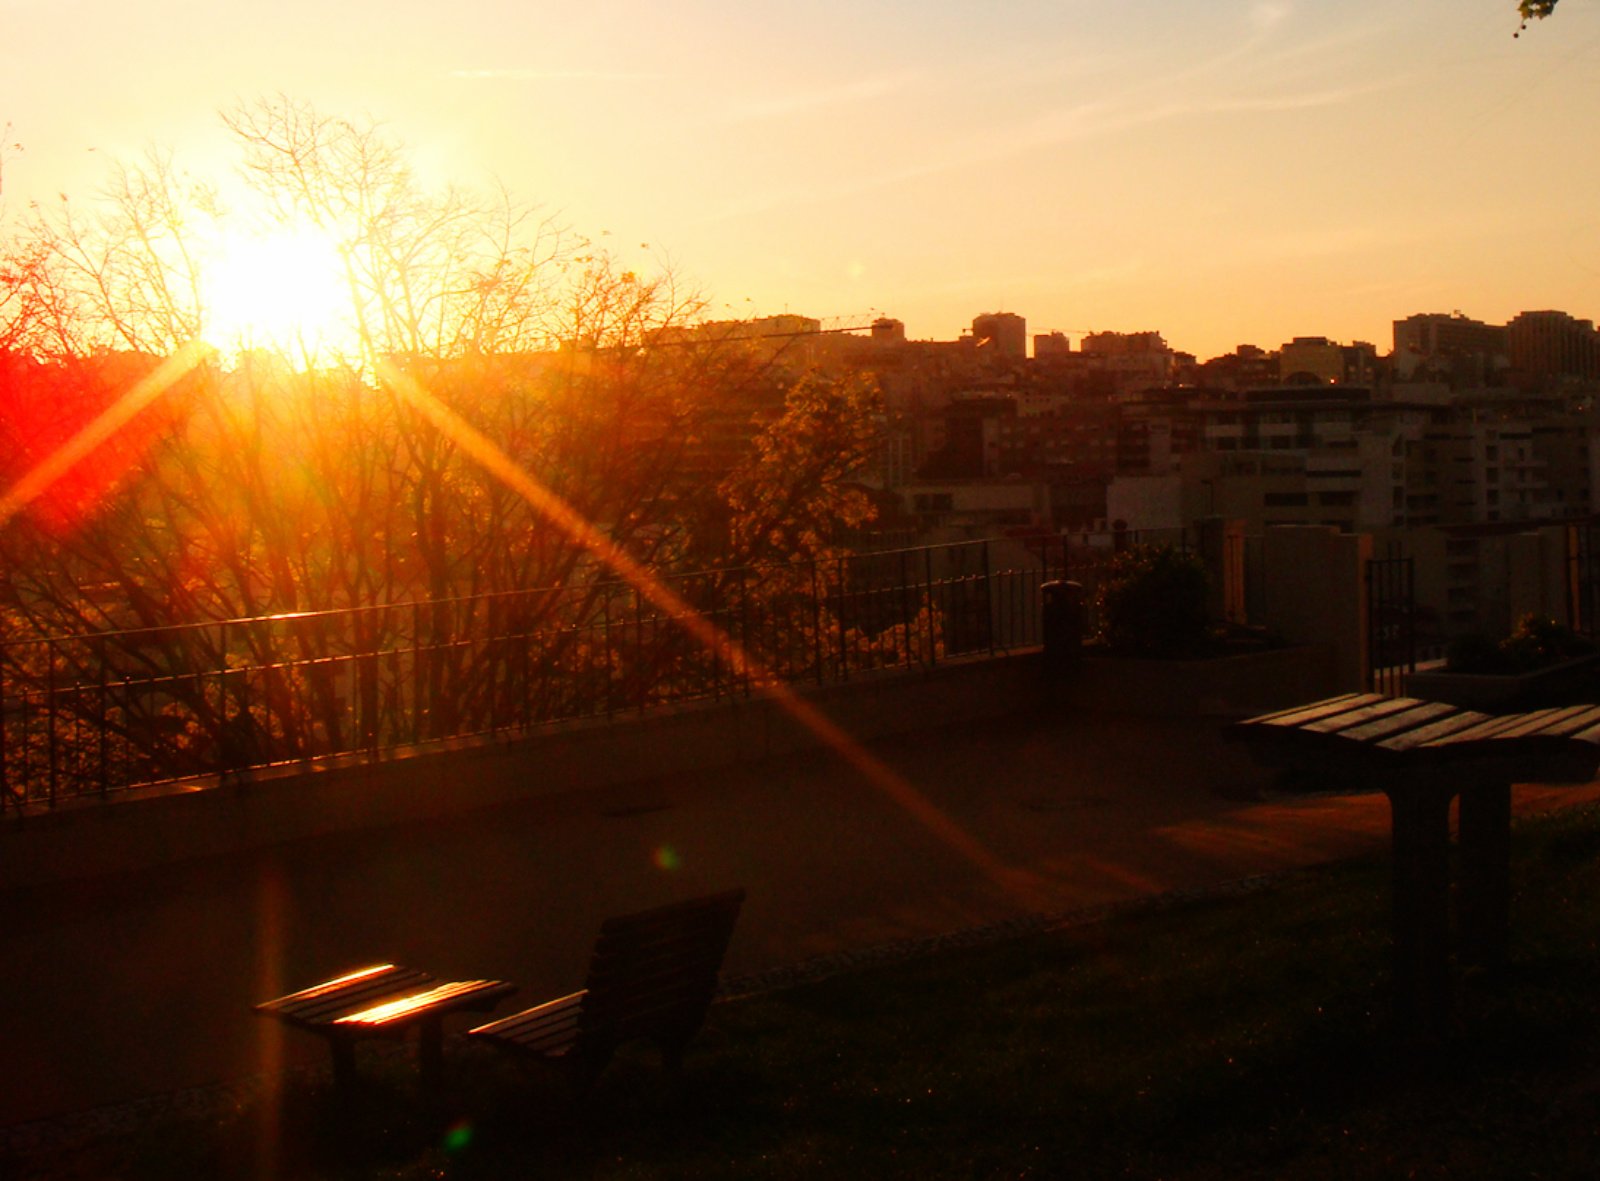 How to see sunset at Jardim do Torel in Lisbon